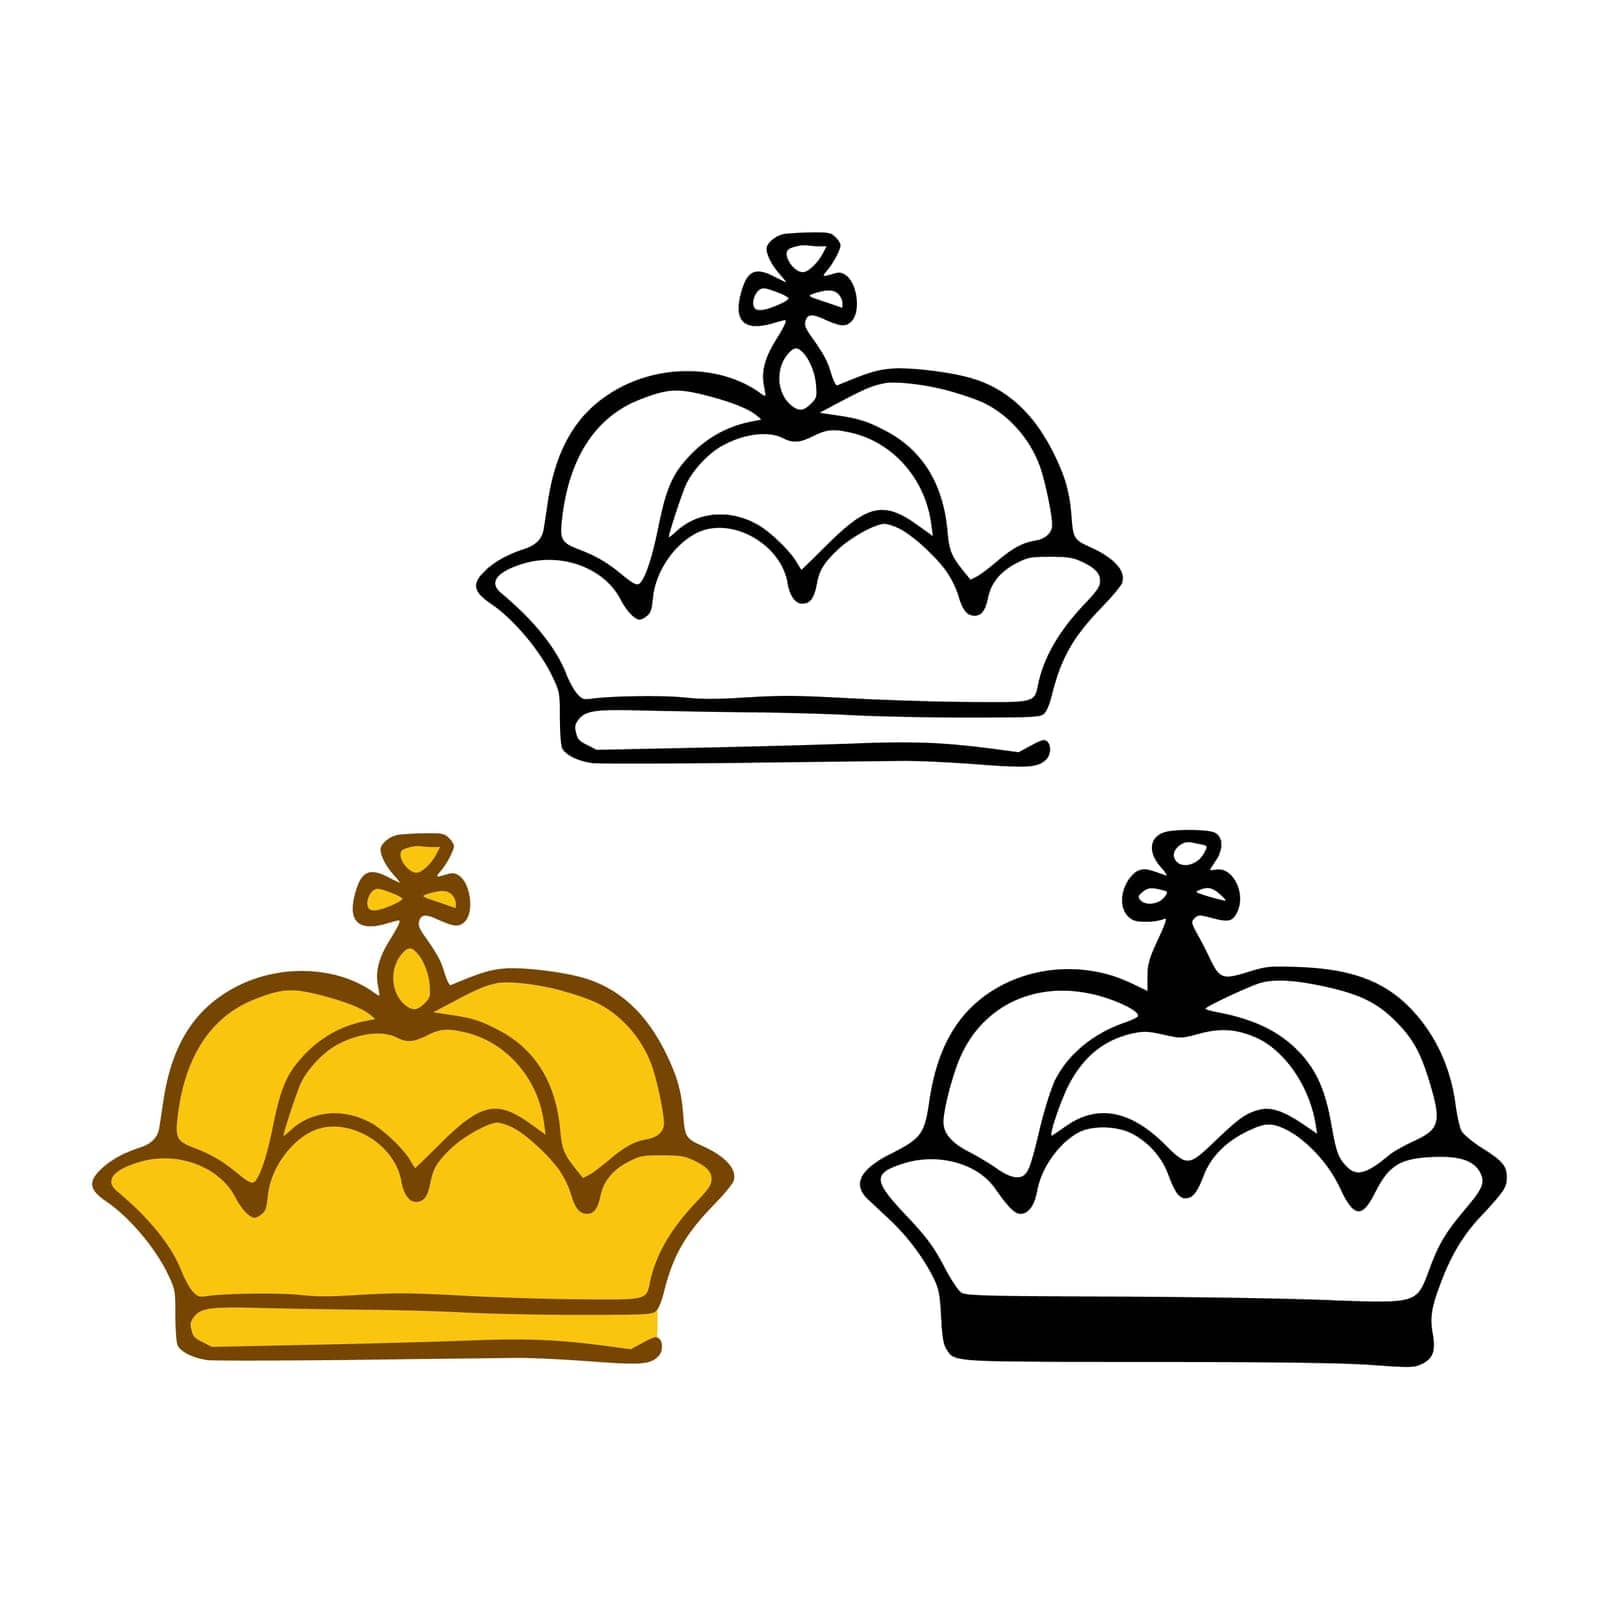 Monarch crown icon set in doodles styles isolated on white background. Royal or queen sign, authority symbol by vsever